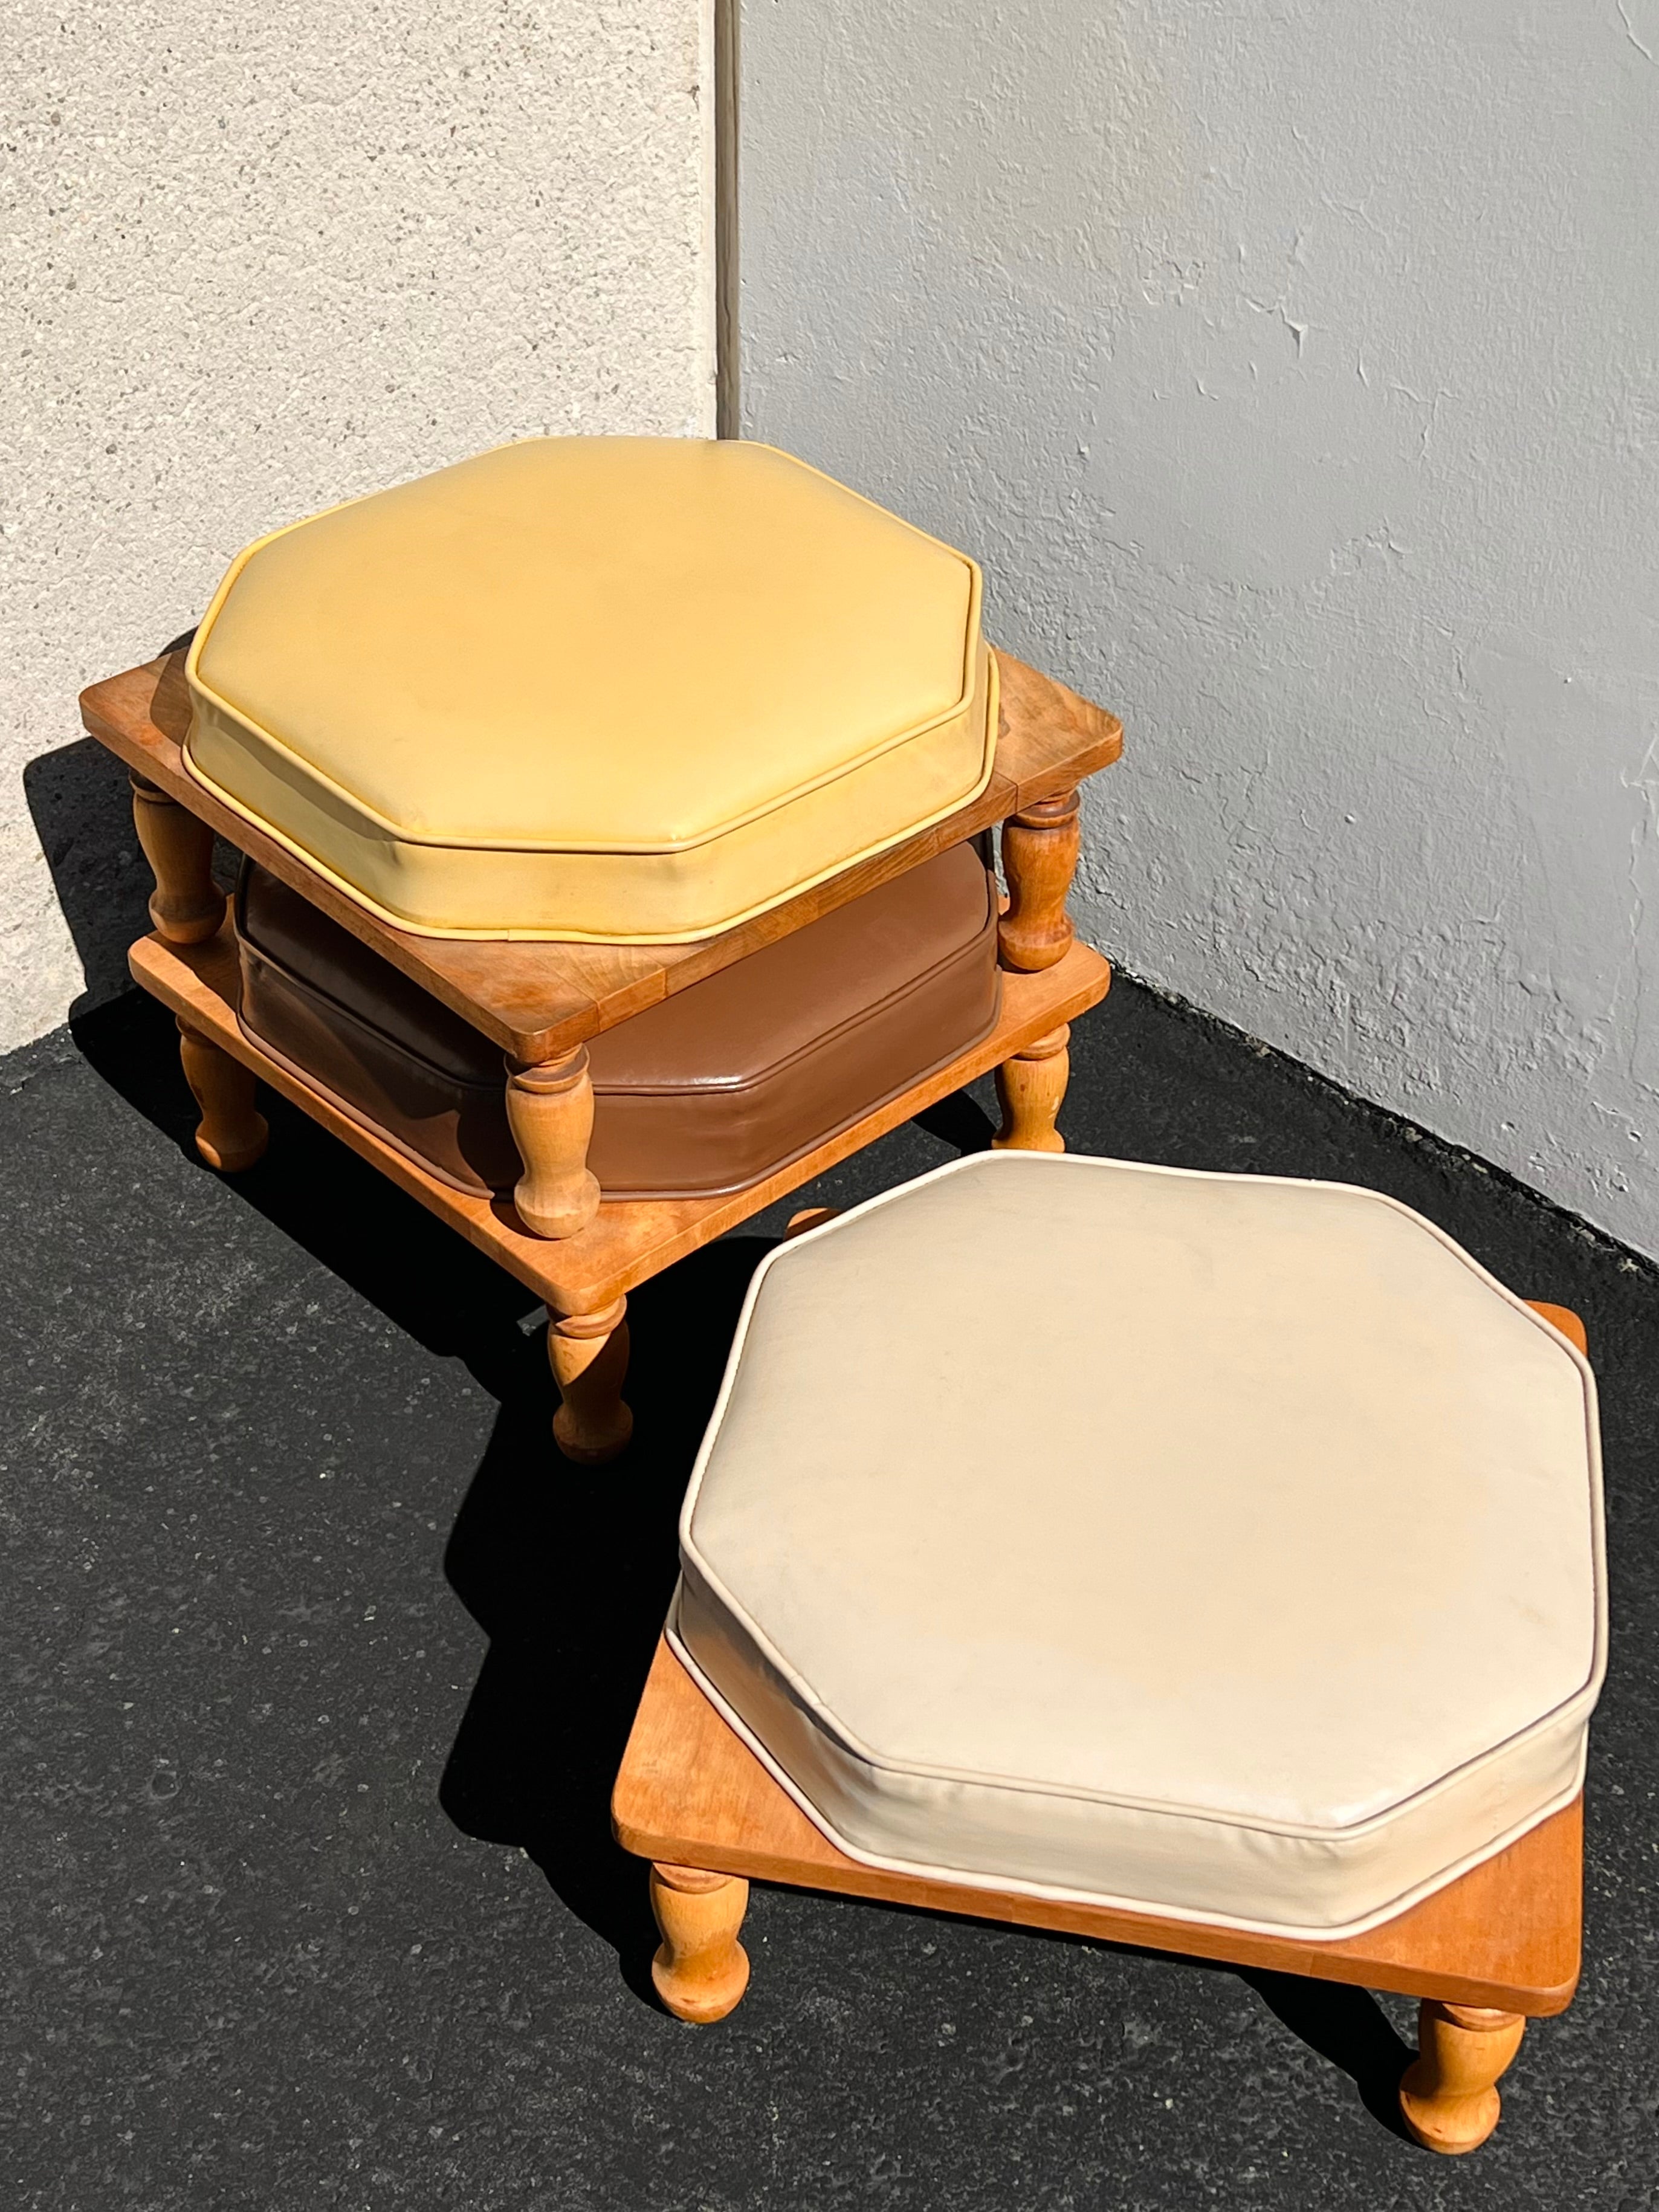 Mini Set of 3 MCM “Ethan Allen” Stacking Baumritter Foot Stools/Ottomans (Vintage)